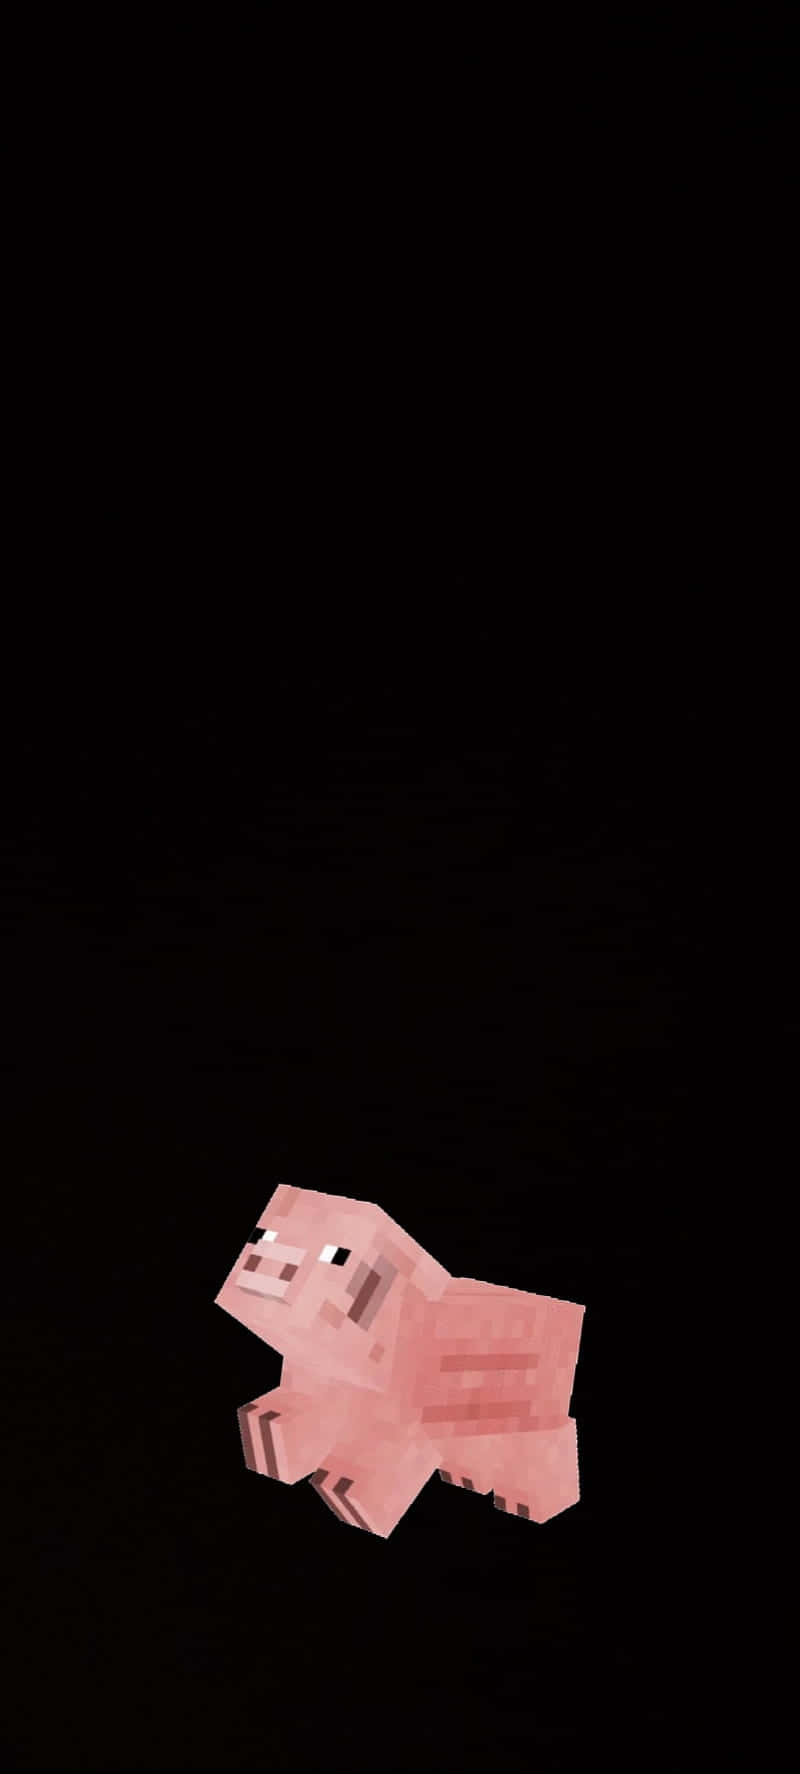 A Minecraft pig meanders along a grassy path. Wallpaper